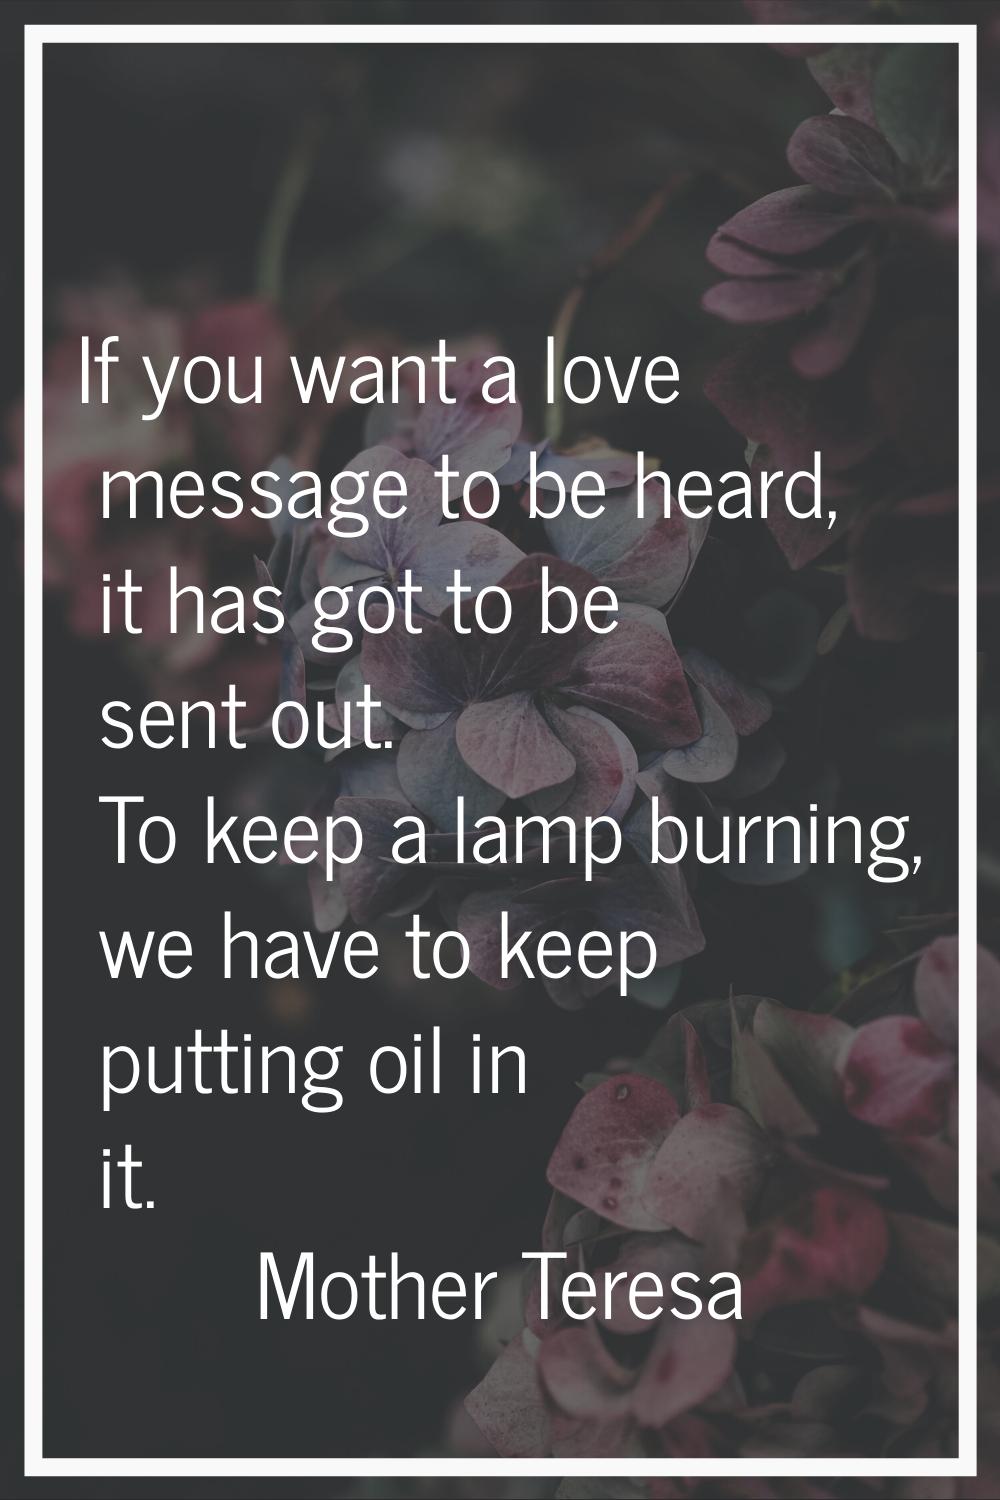 If you want a love message to be heard, it has got to be sent out. To keep a lamp burning, we have 